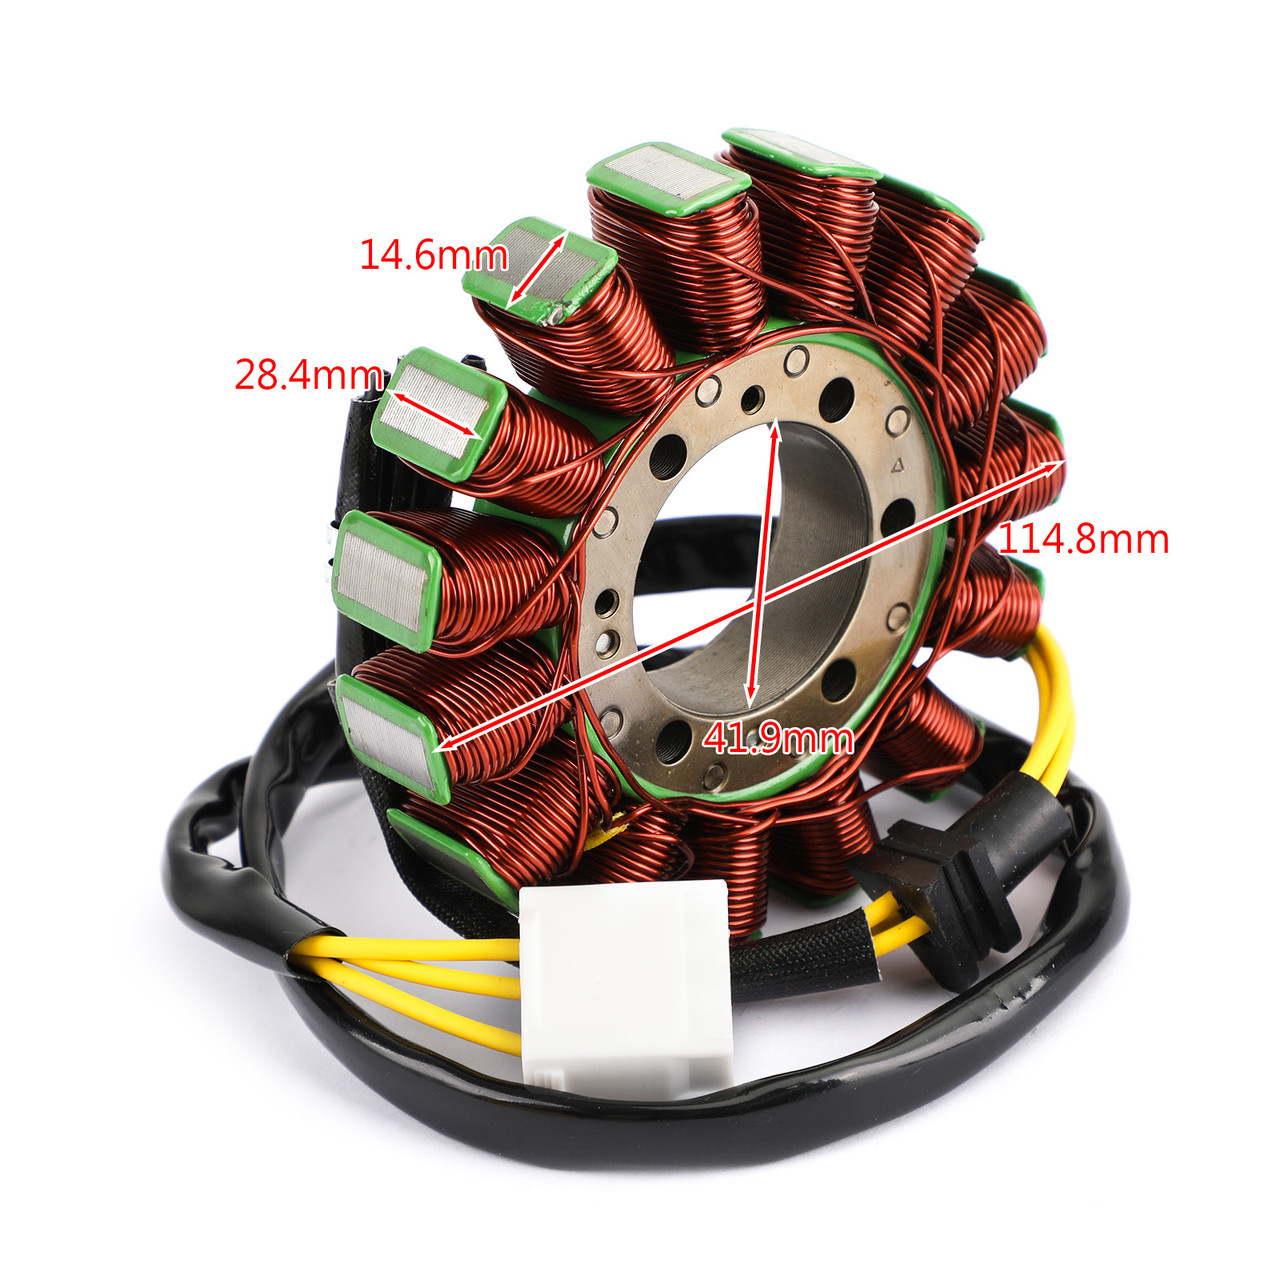 Stator Generator Fits For Honda NT700V Deauville ABS 2006-2011 31120-MEW-921